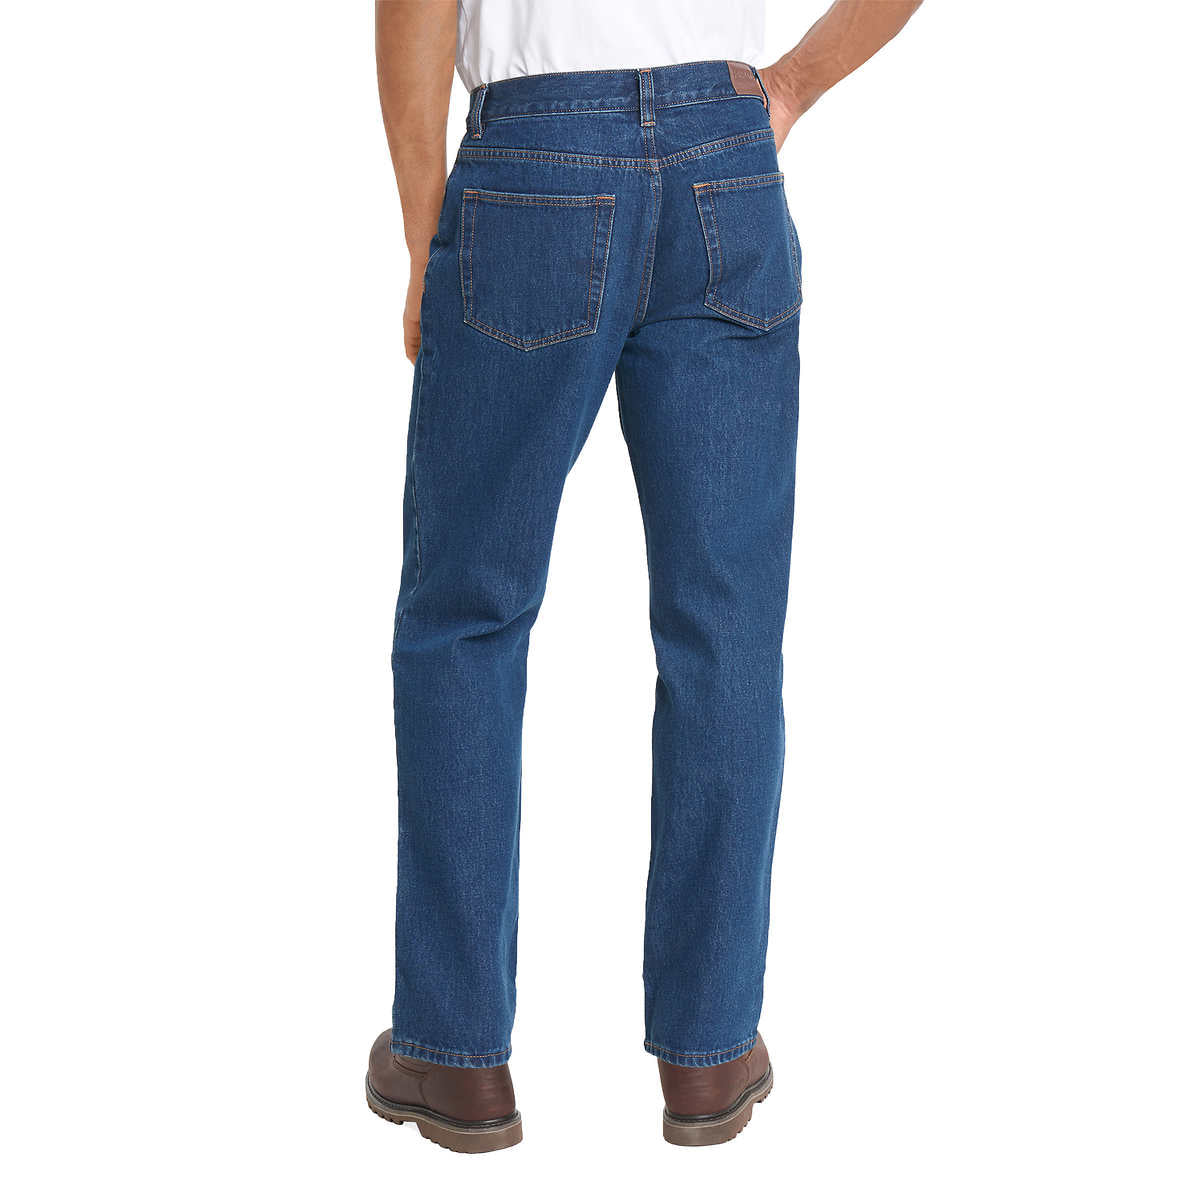 Kirkland Classic Relaxed Fit Jeans